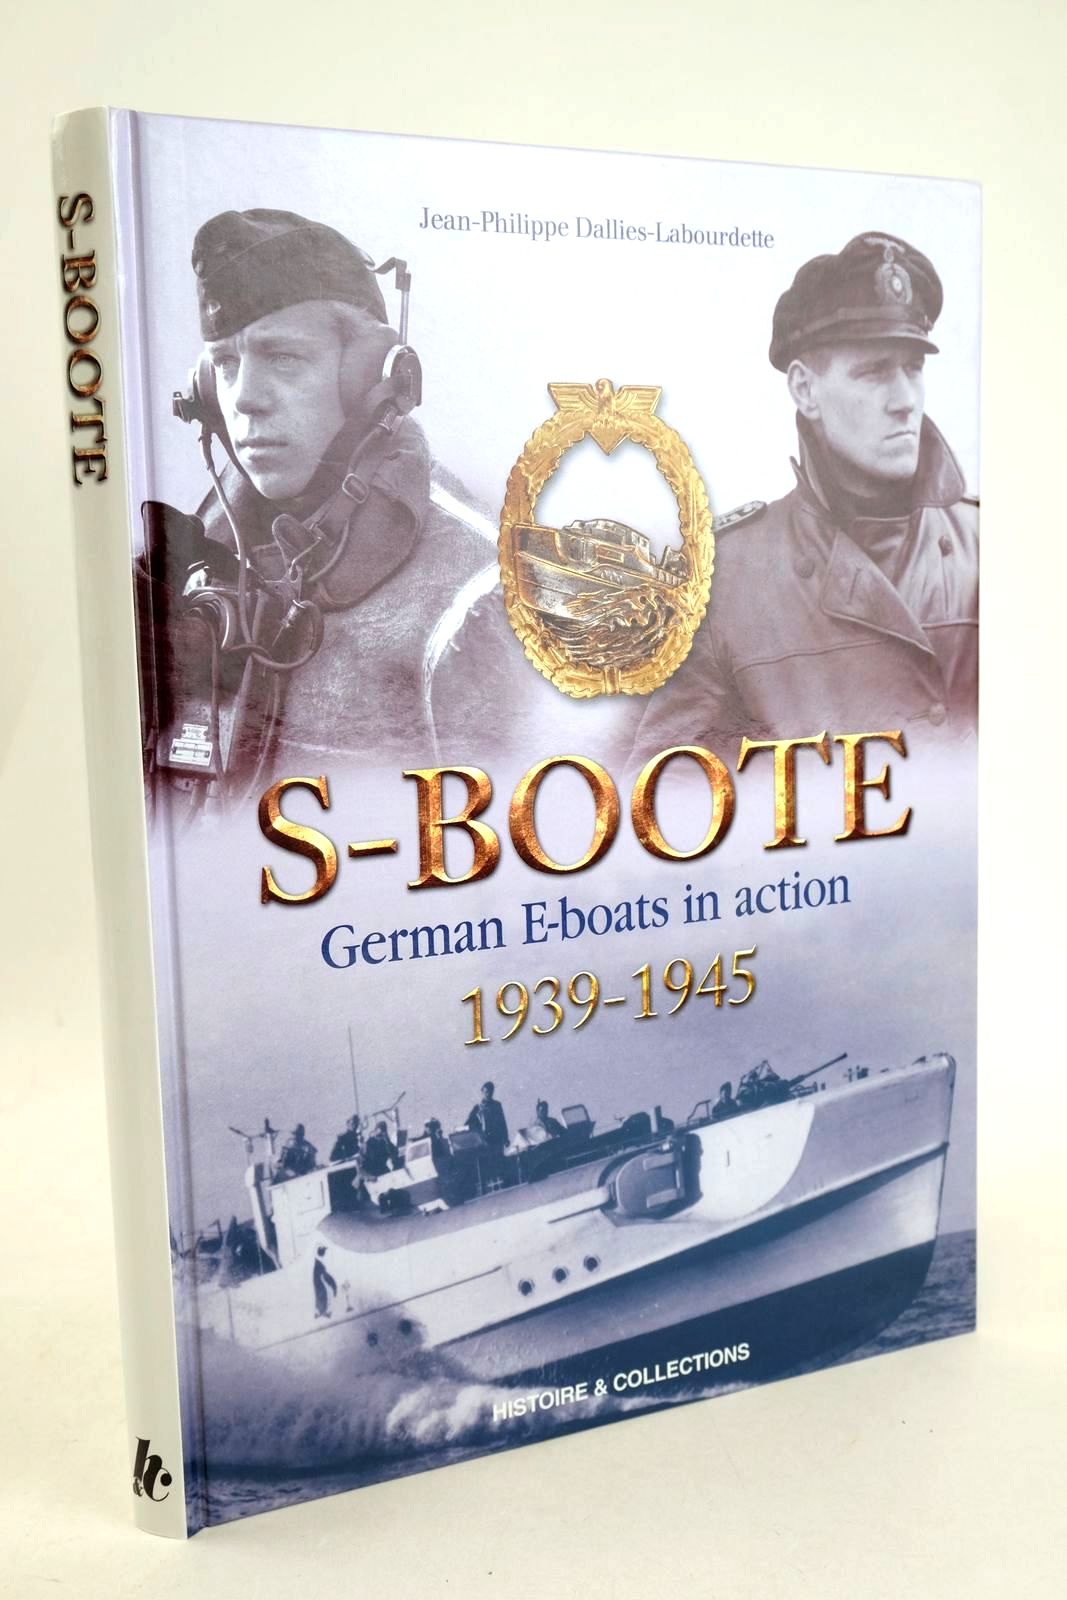 Photo of S-BOOTE GERMAN E-BOATS IN ACTION (1939-1945) written by Dallies-Labourdette, Jean published by Histoire &amp; Collections (STOCK CODE: 1327991)  for sale by Stella & Rose's Books